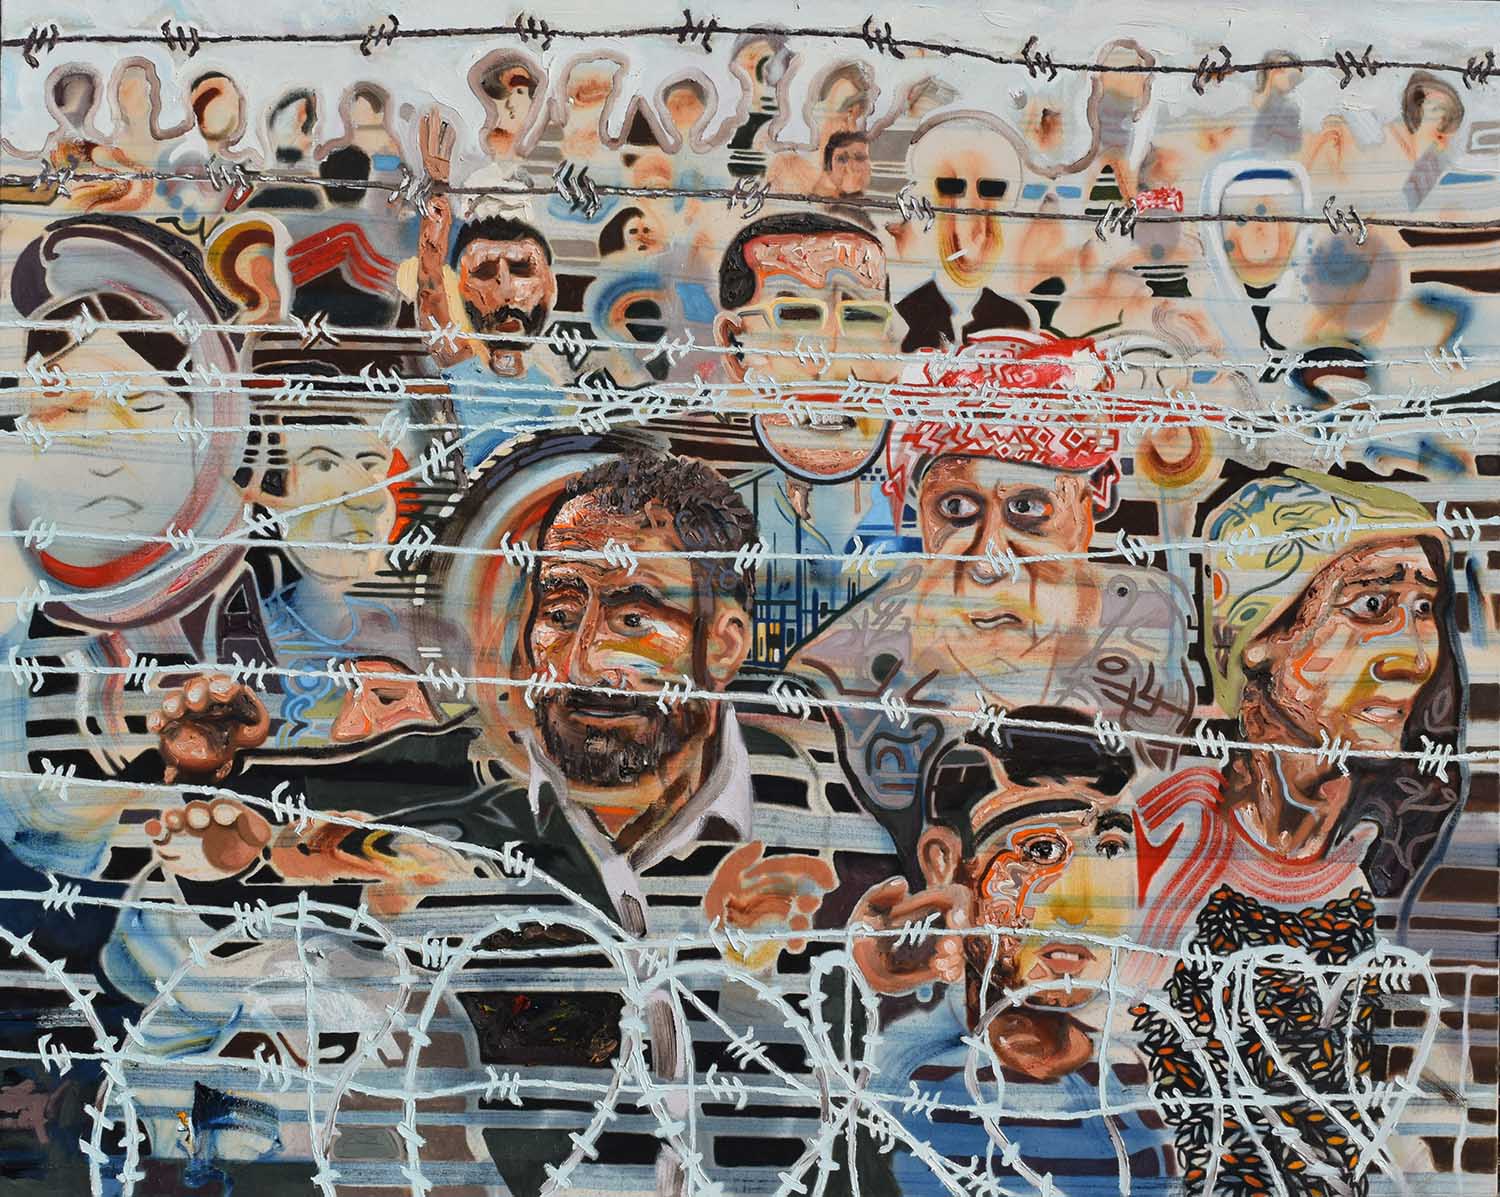 human rights, contemporary painting, displacement, migration, border control, contemporary painting, figurative painting, movement, dispersion, fine art, laurence jansen, laurence jansen art, laurence jansen artist, london based artist